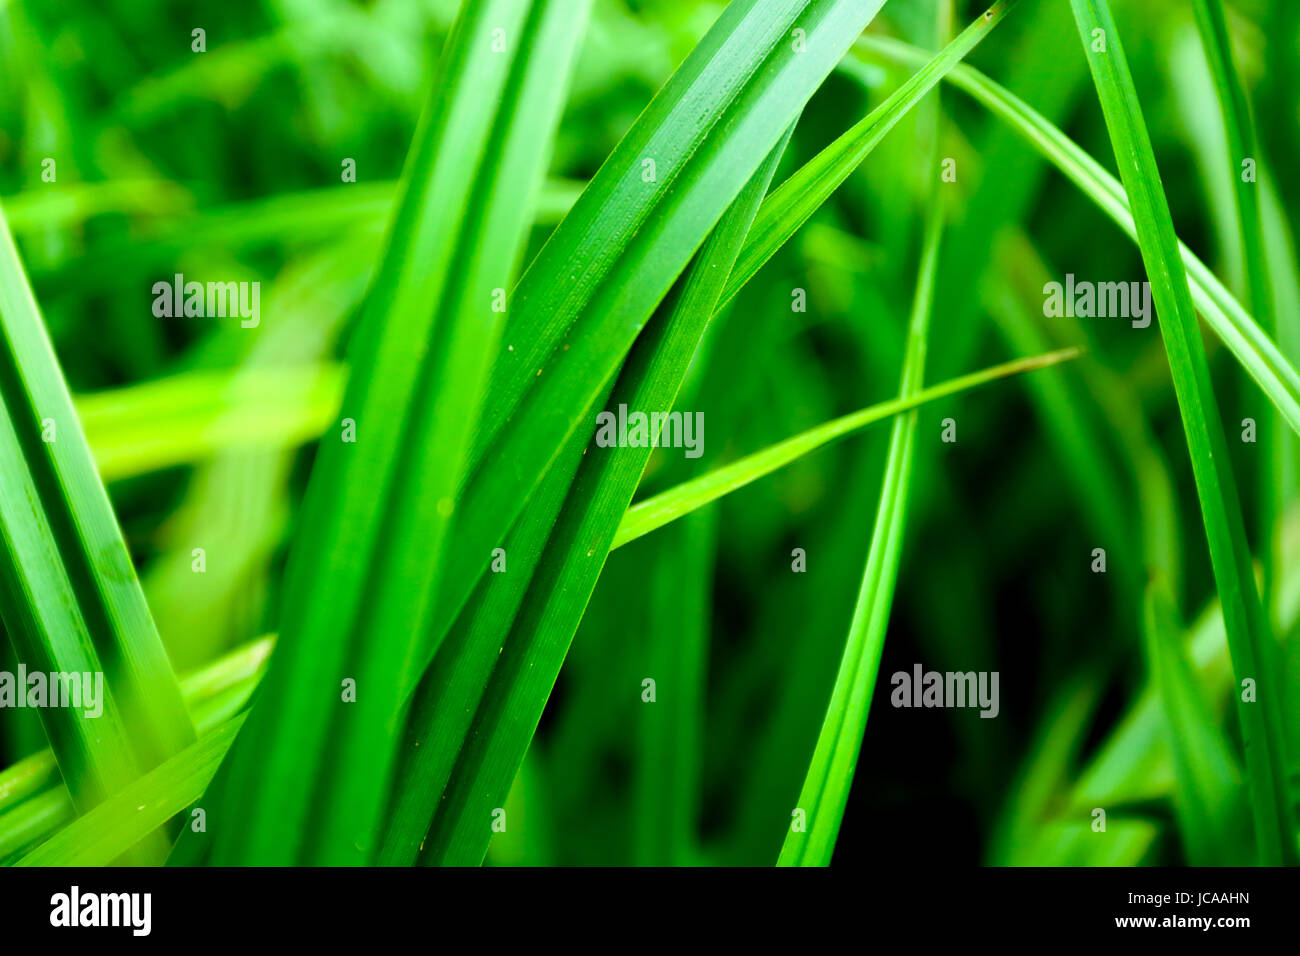 Plants: Swamps reed Stock Photo